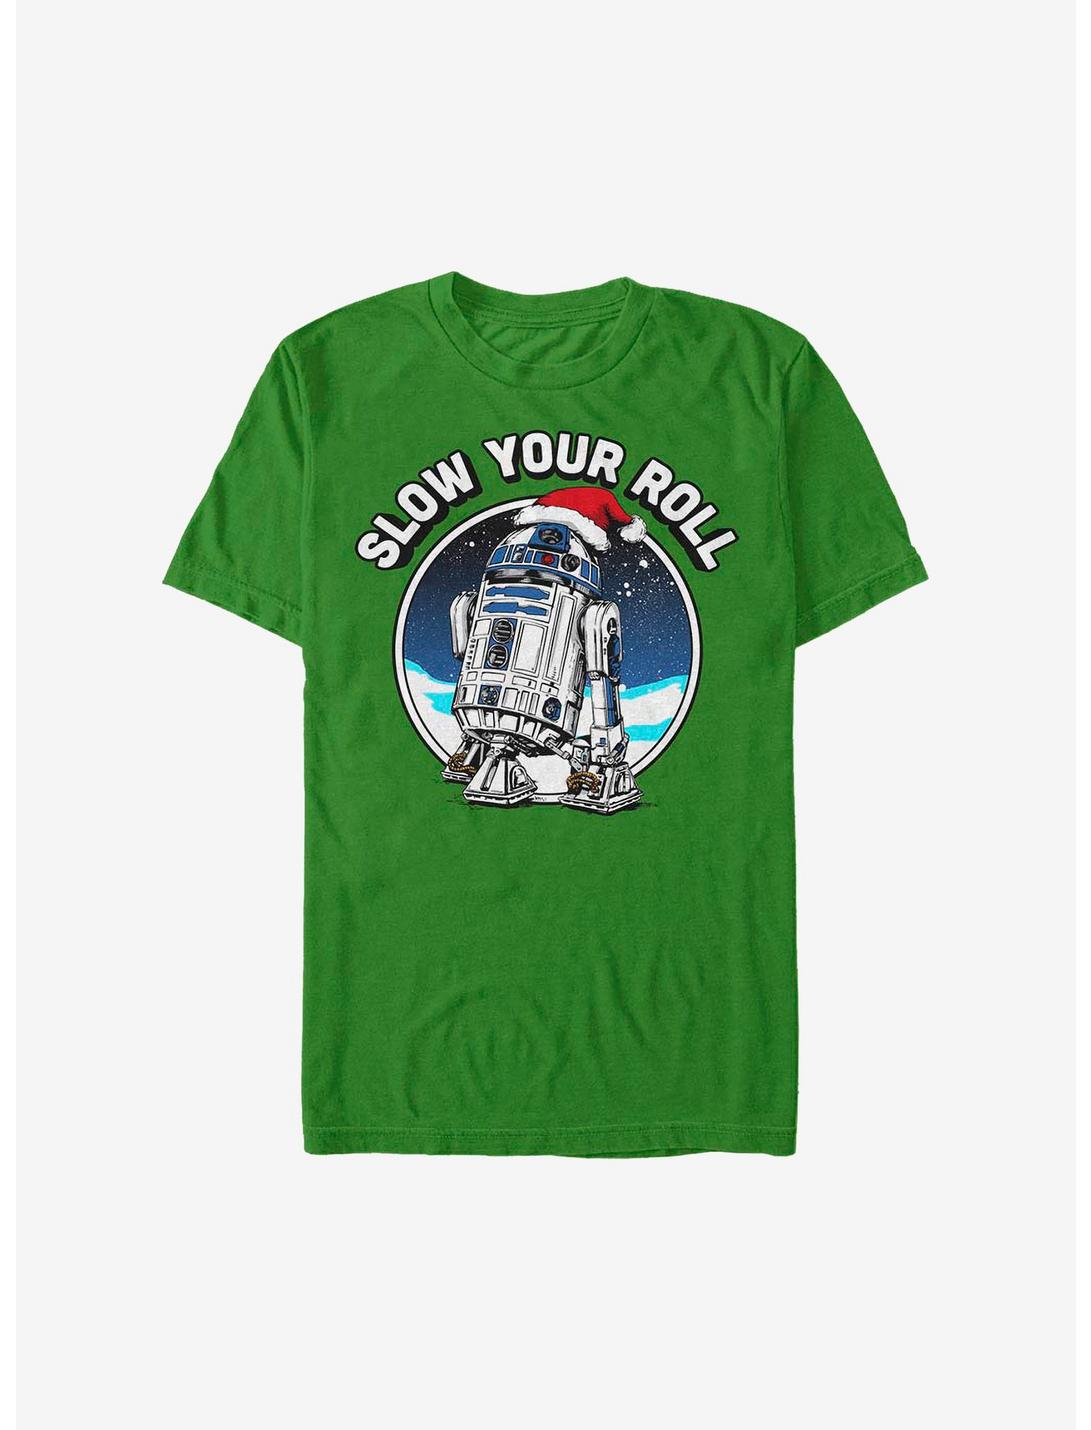 Star Wars Slow Your Roll Holiday T-Shirt, KELLY, hi-res